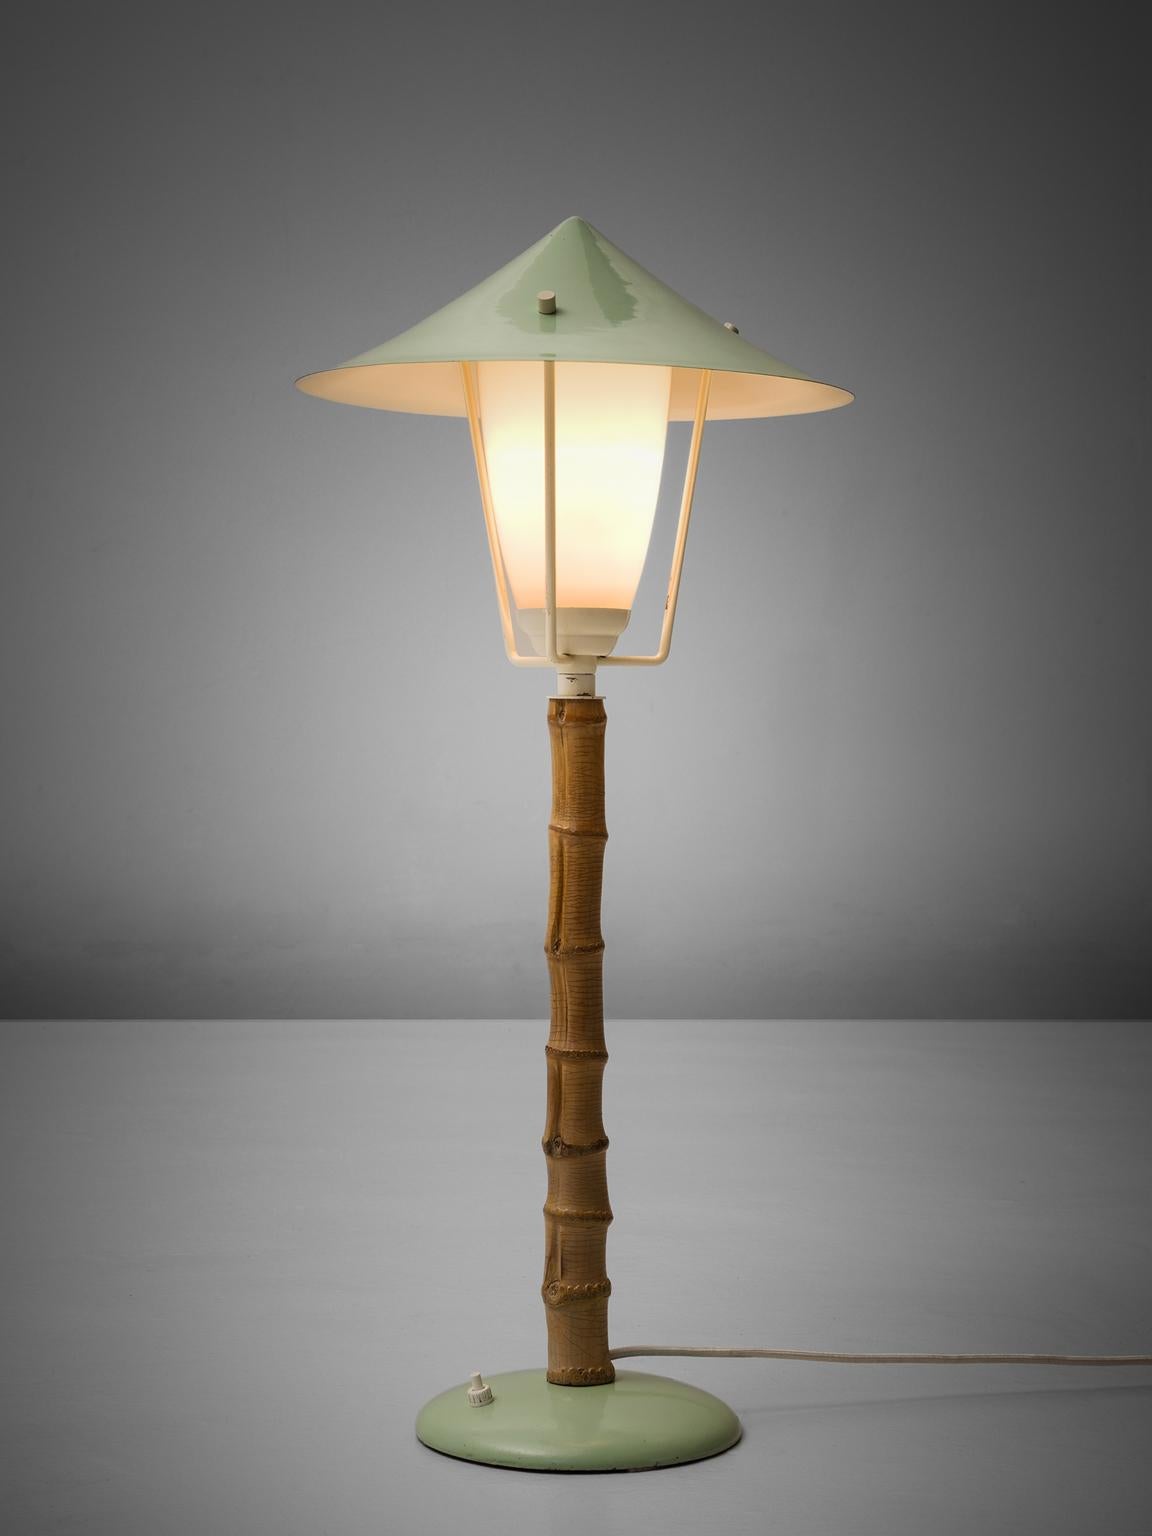 J.T. Kalmar, table lamp, metal, faux-bamboo and glass, Austria, 1950s. 

Frivolous table lamp, or small floor lamp in green coated metal. This lamp reminds of a tradition garden light. The garden is literally represented in this light by the